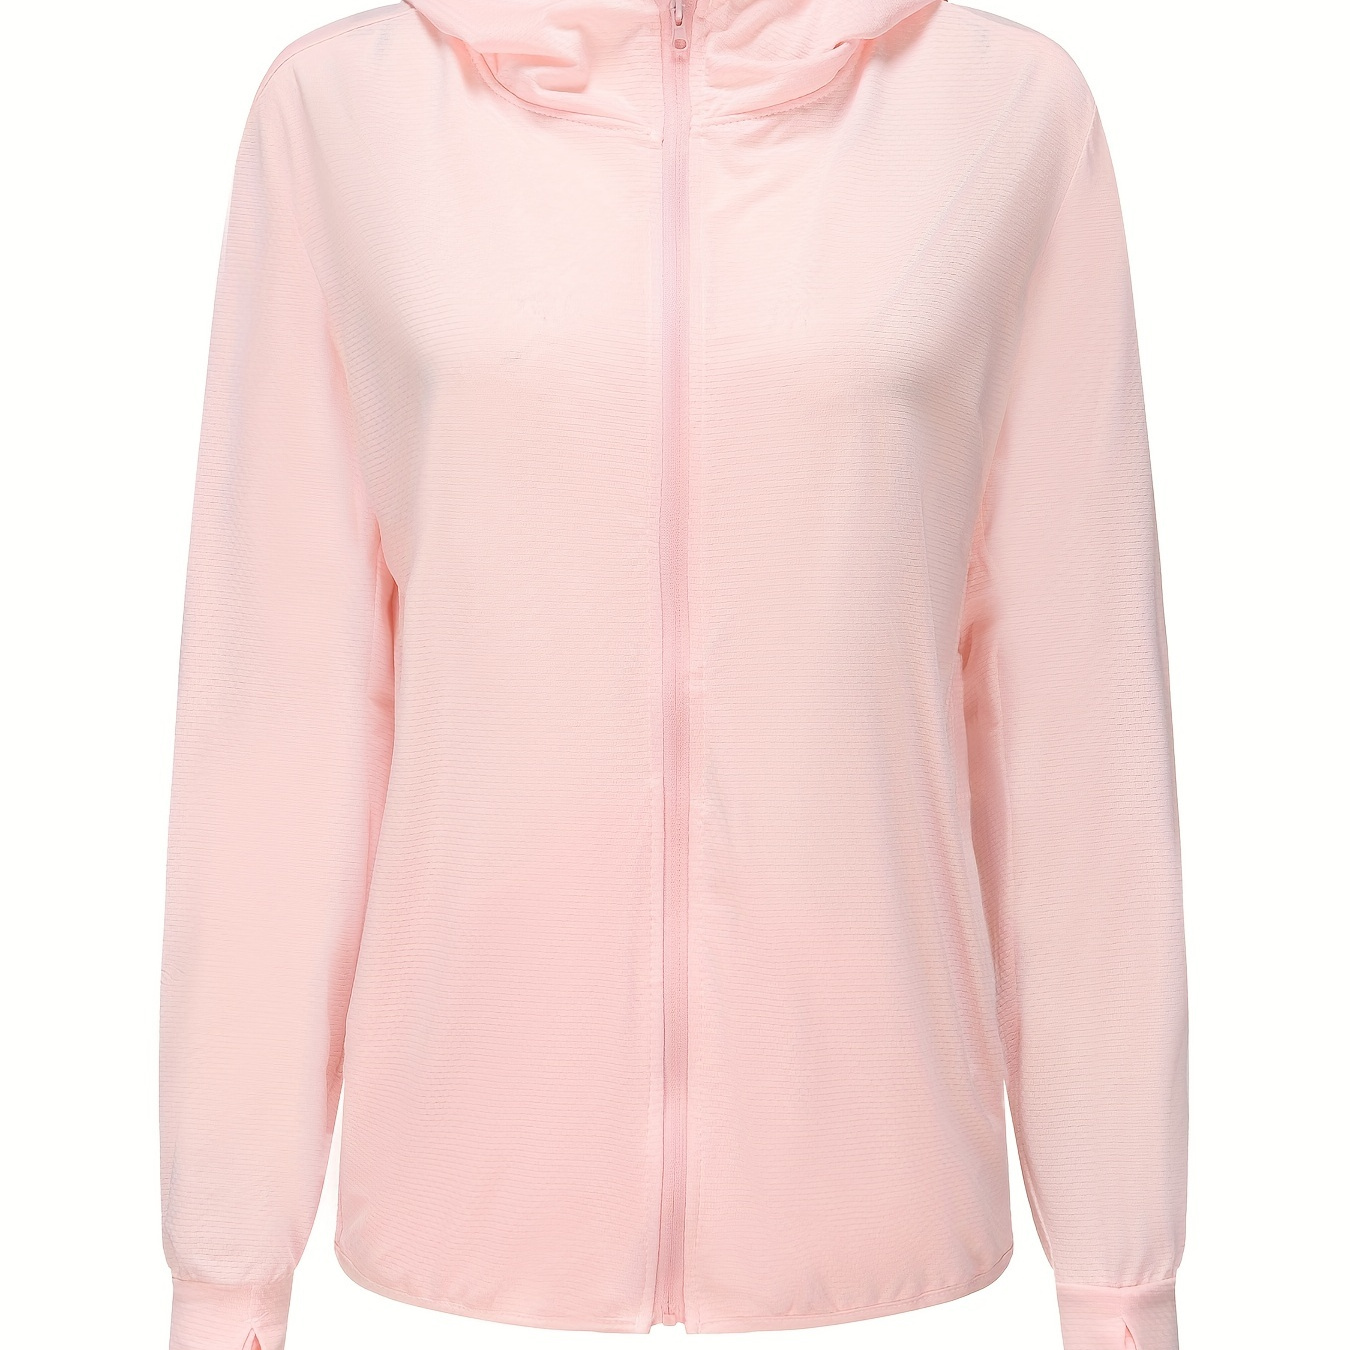 Womens Ultra Thin Ice Silk Ladies Summer Jackets For Summer Outdoor Sports  UV Protection, Breathable, Quick Drying, And Relaxing From Zazvf, $36.49